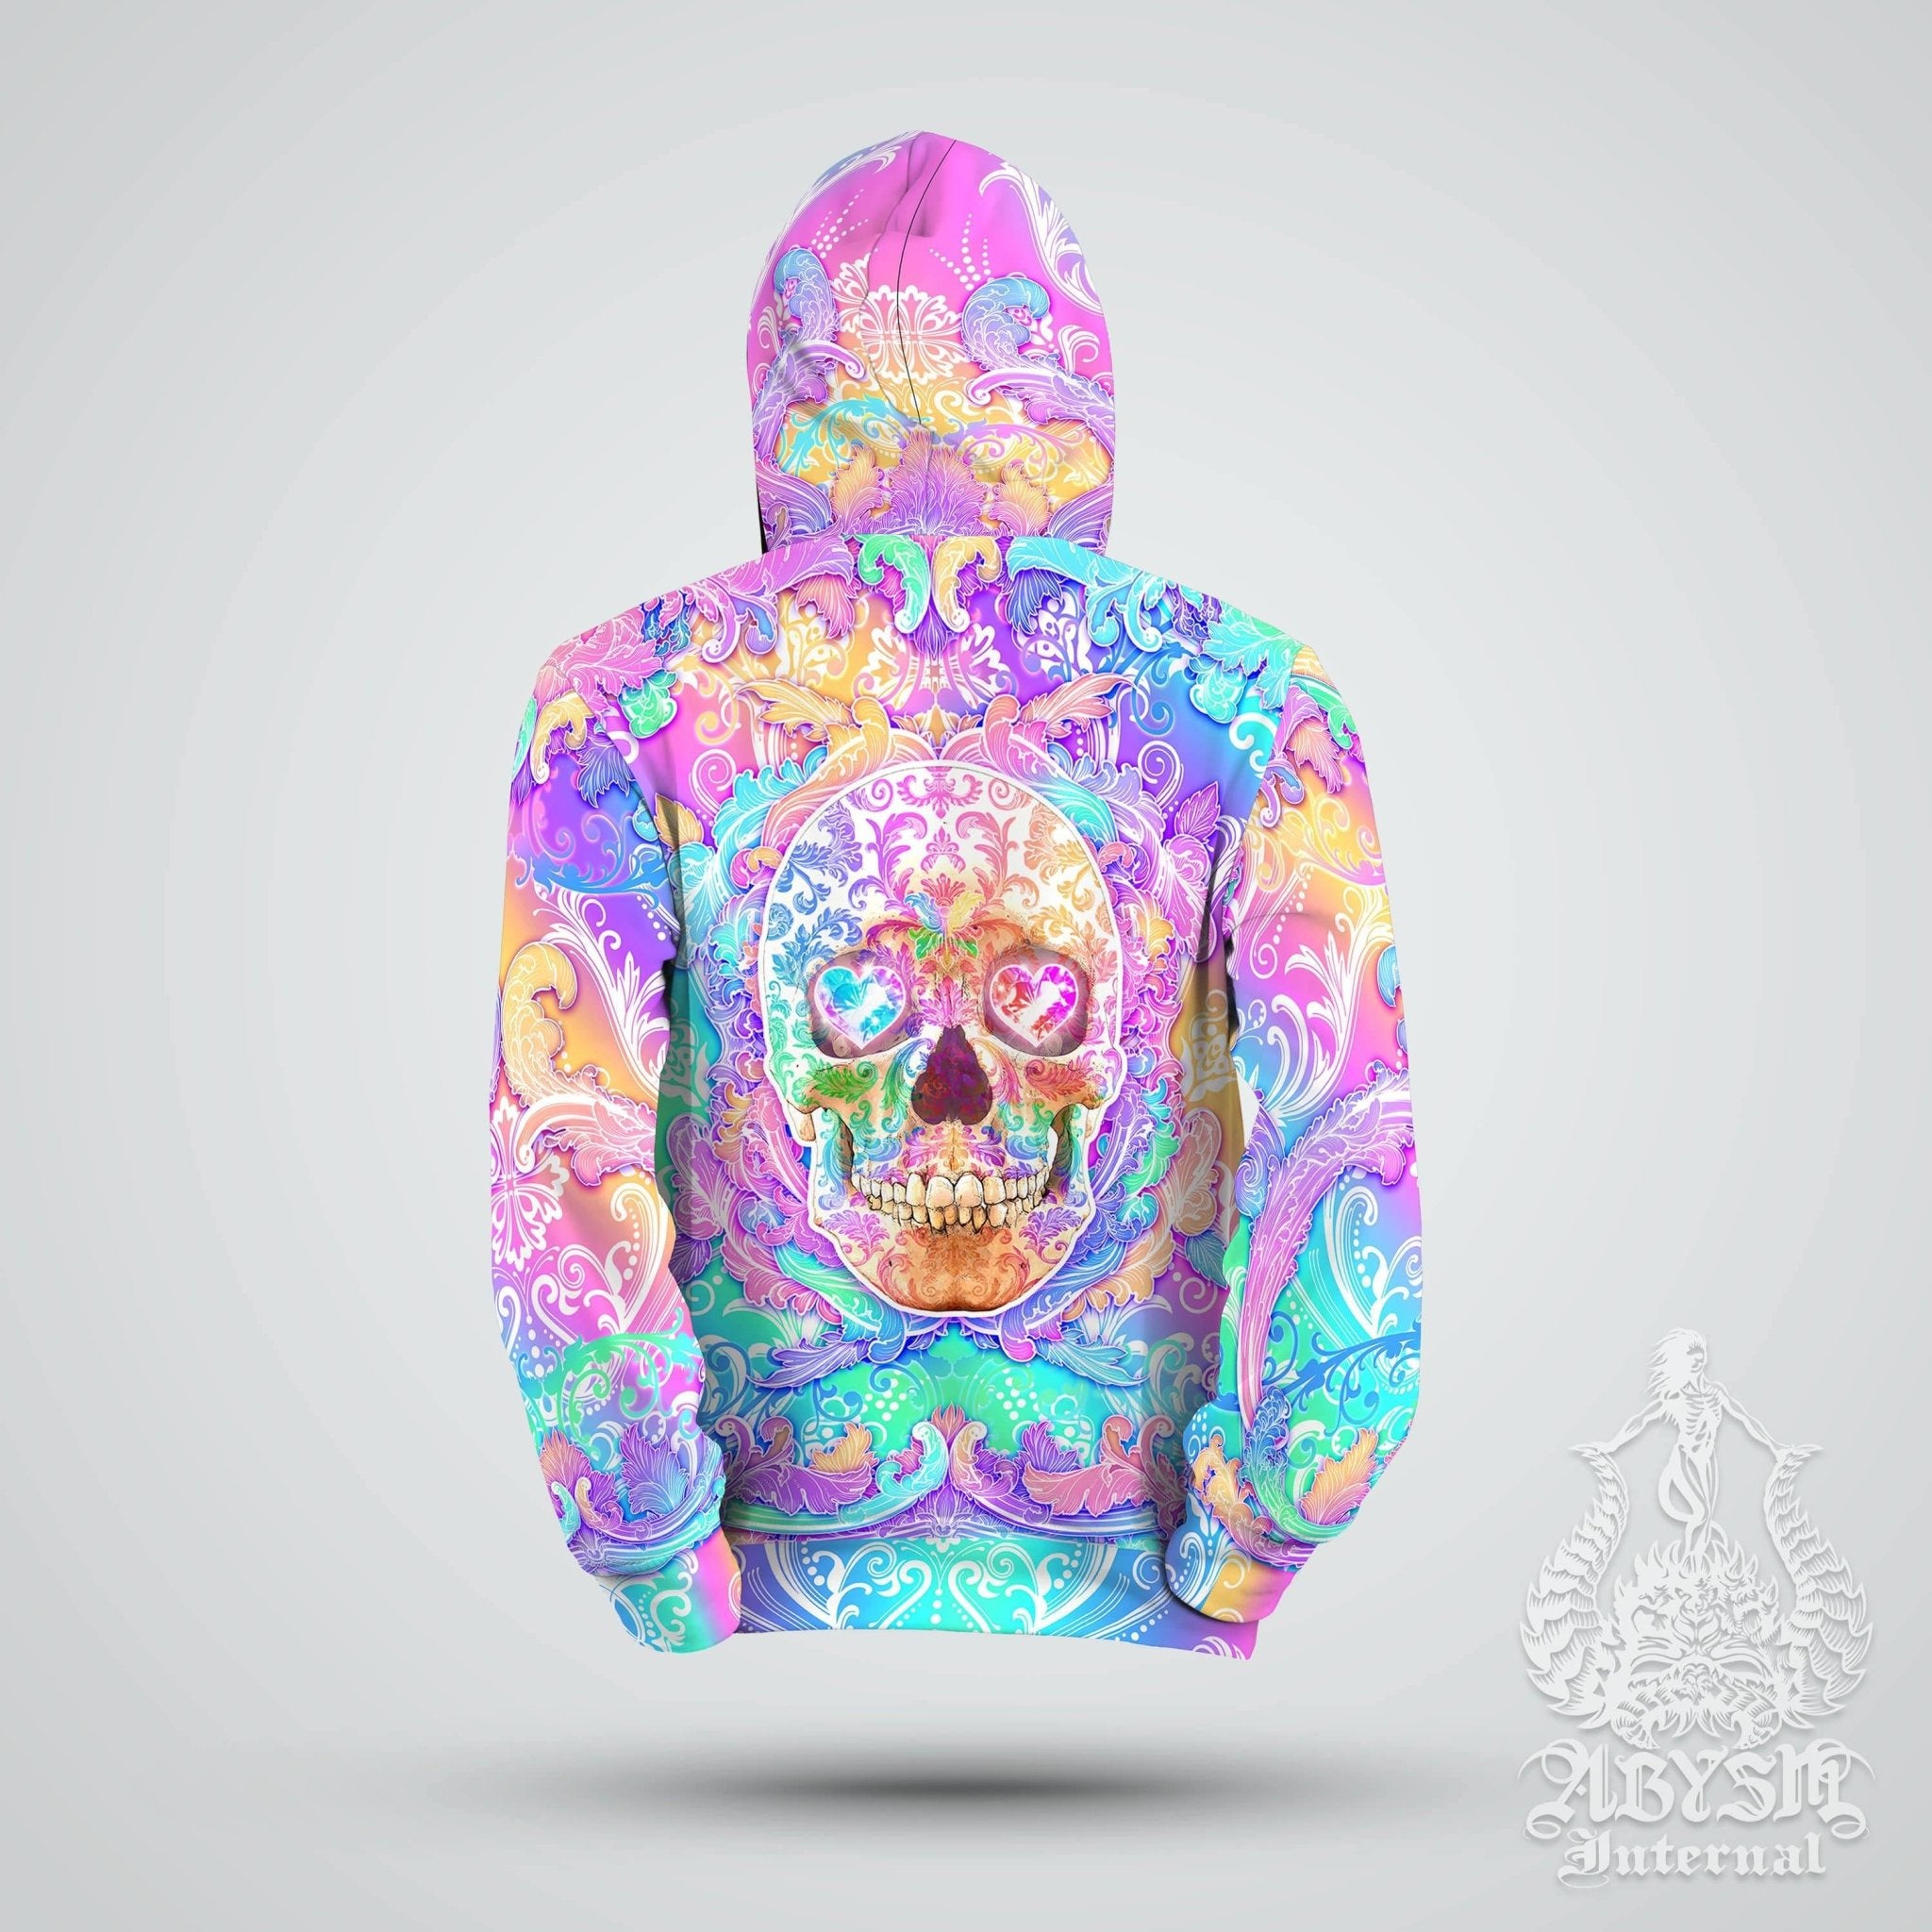 Pastel Skull Hoodie, Psychedelic Streetwear, Rave Outfit, Aesthetic Festival Sweater, Trippy Clothing, Unisex - Abysm Internal